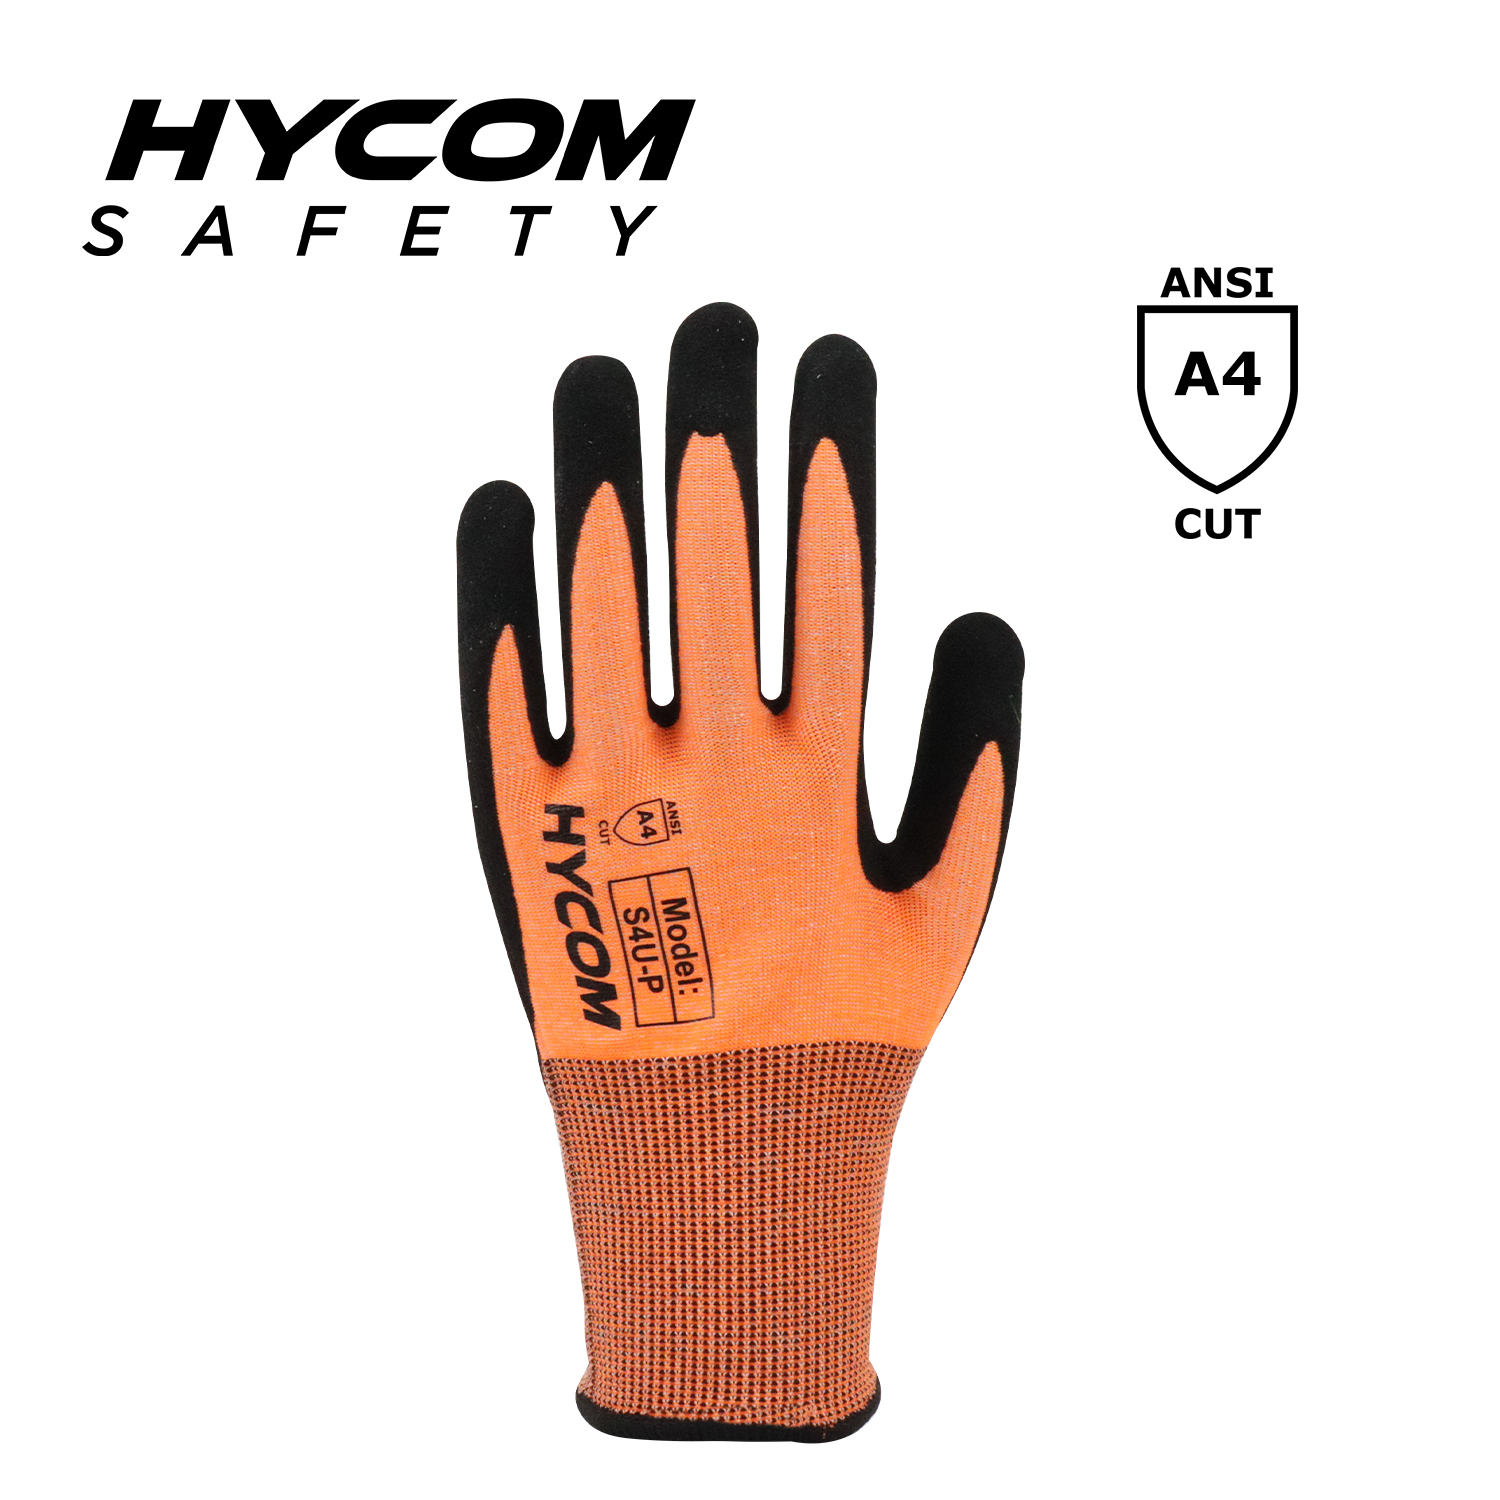 HYCOM 18G ANSI 4 Cut Resistant Glove Recycled Yarn with Palm Sandy Nitrile Coating Ppe Gloves